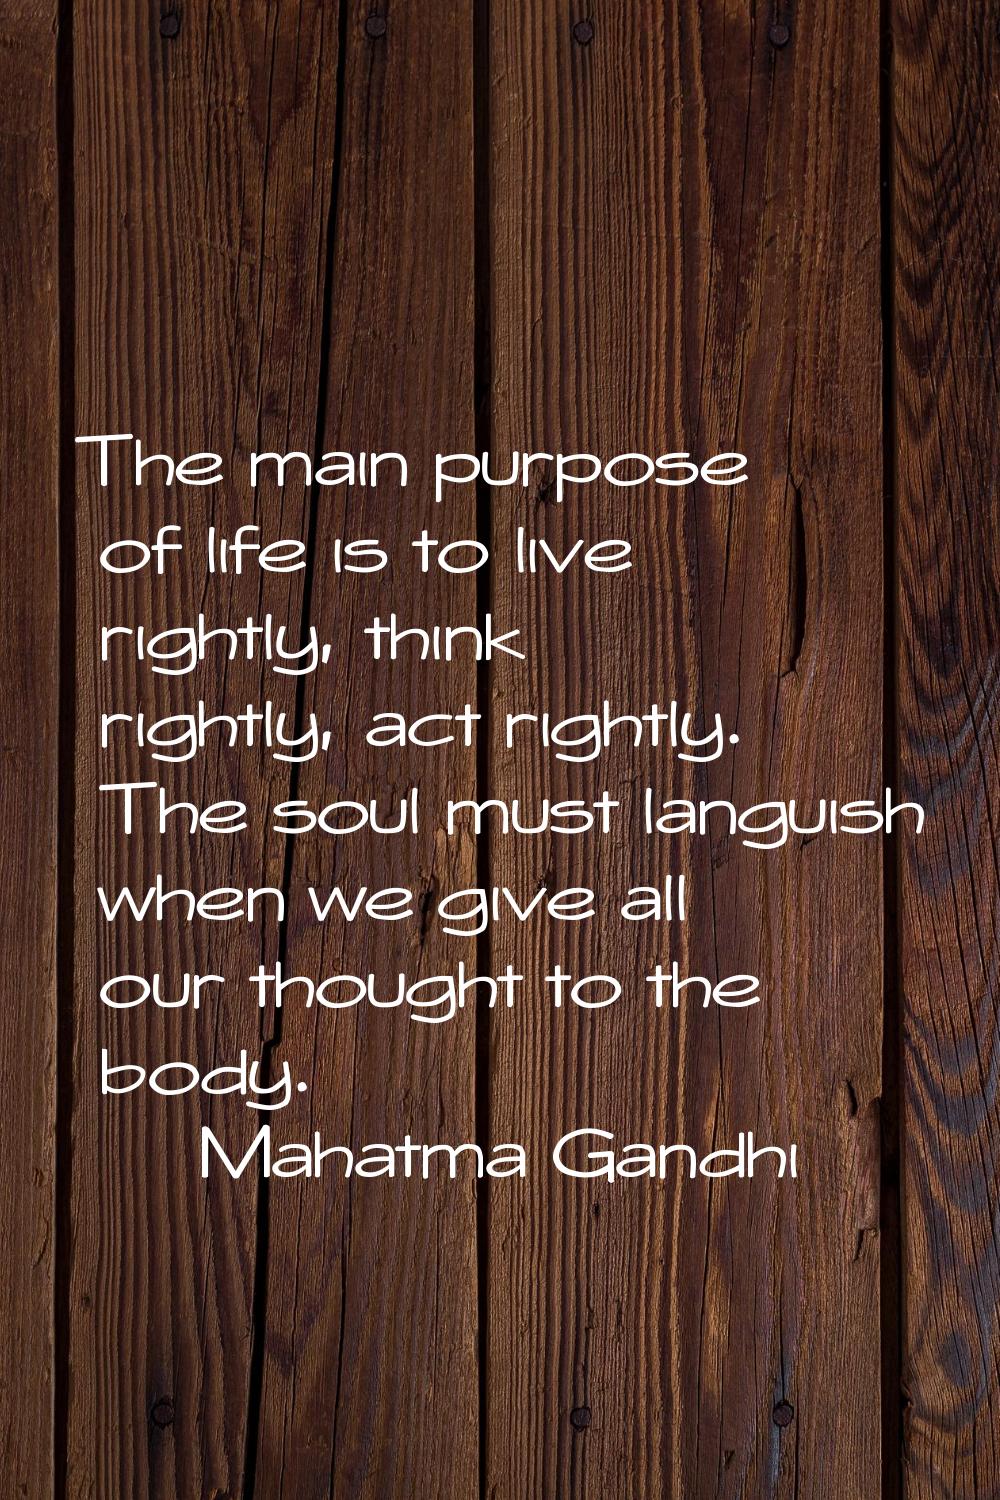 The main purpose of life is to live rightly, think rightly, act rightly. The soul must languish whe